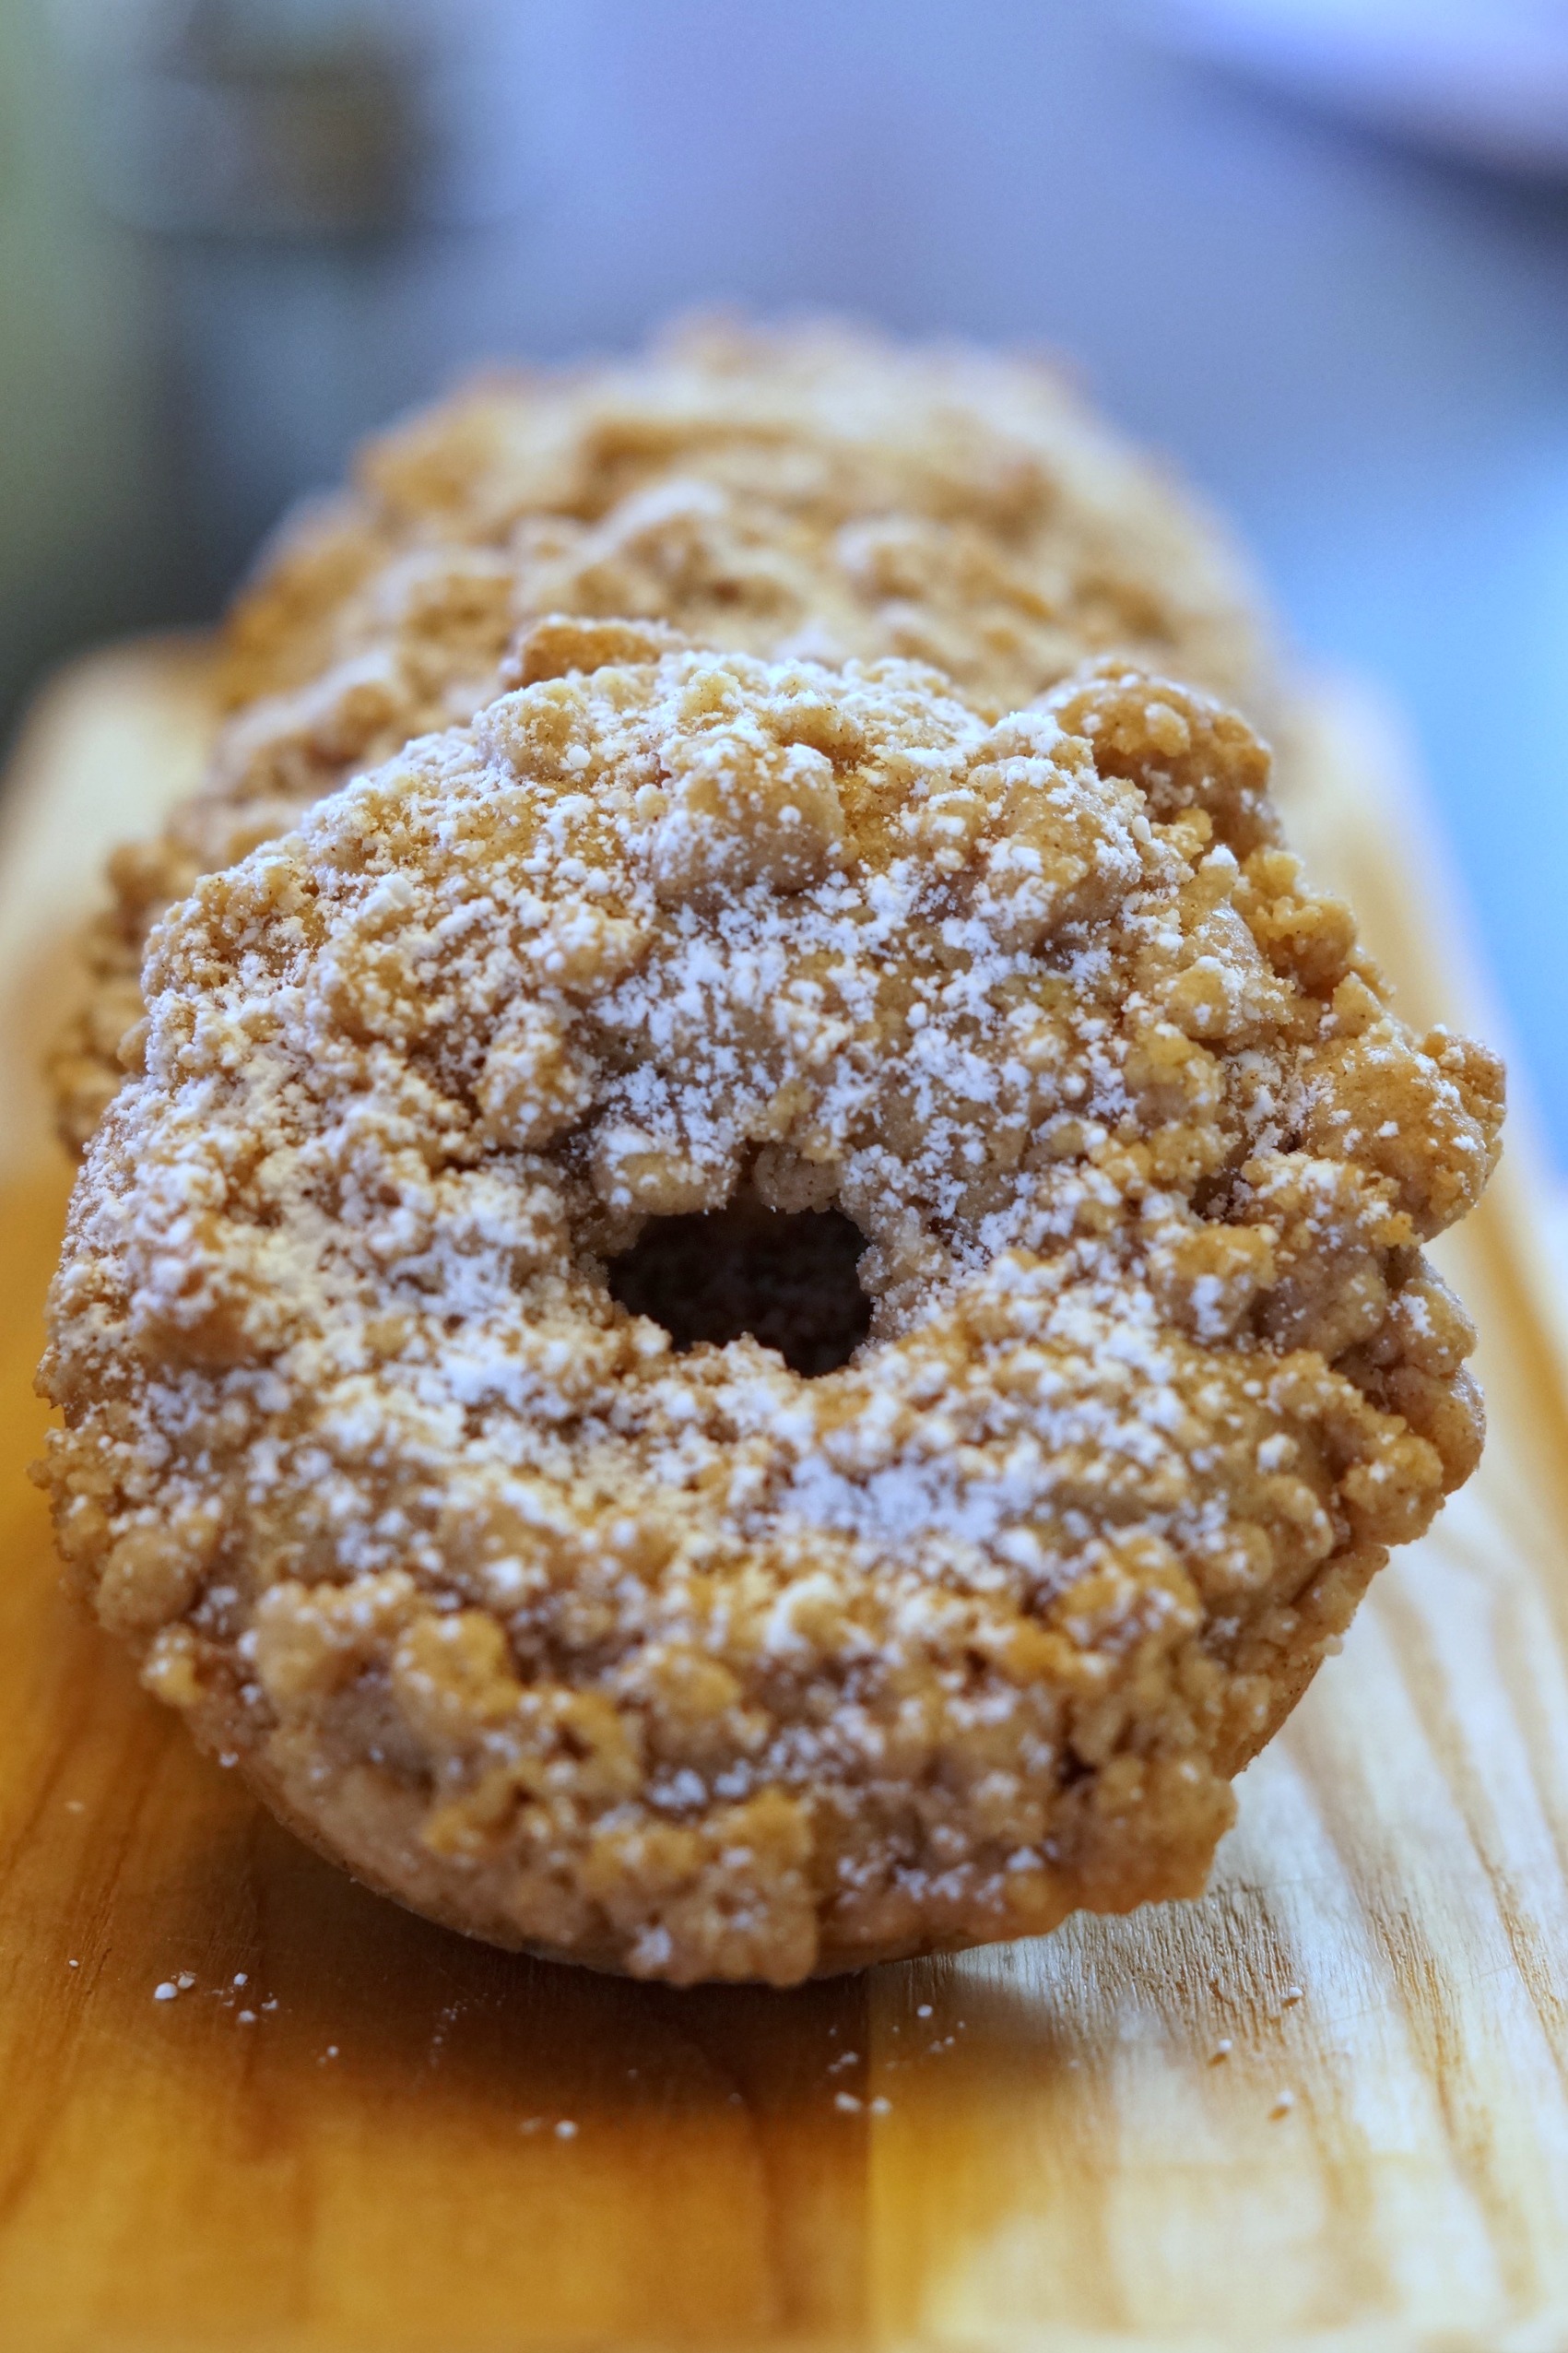 Looking for the perfect pairing for a hot cup of coffee? Look no further than this easy to make coffee cake donut recipe. Grab your oven mitt and get baking!